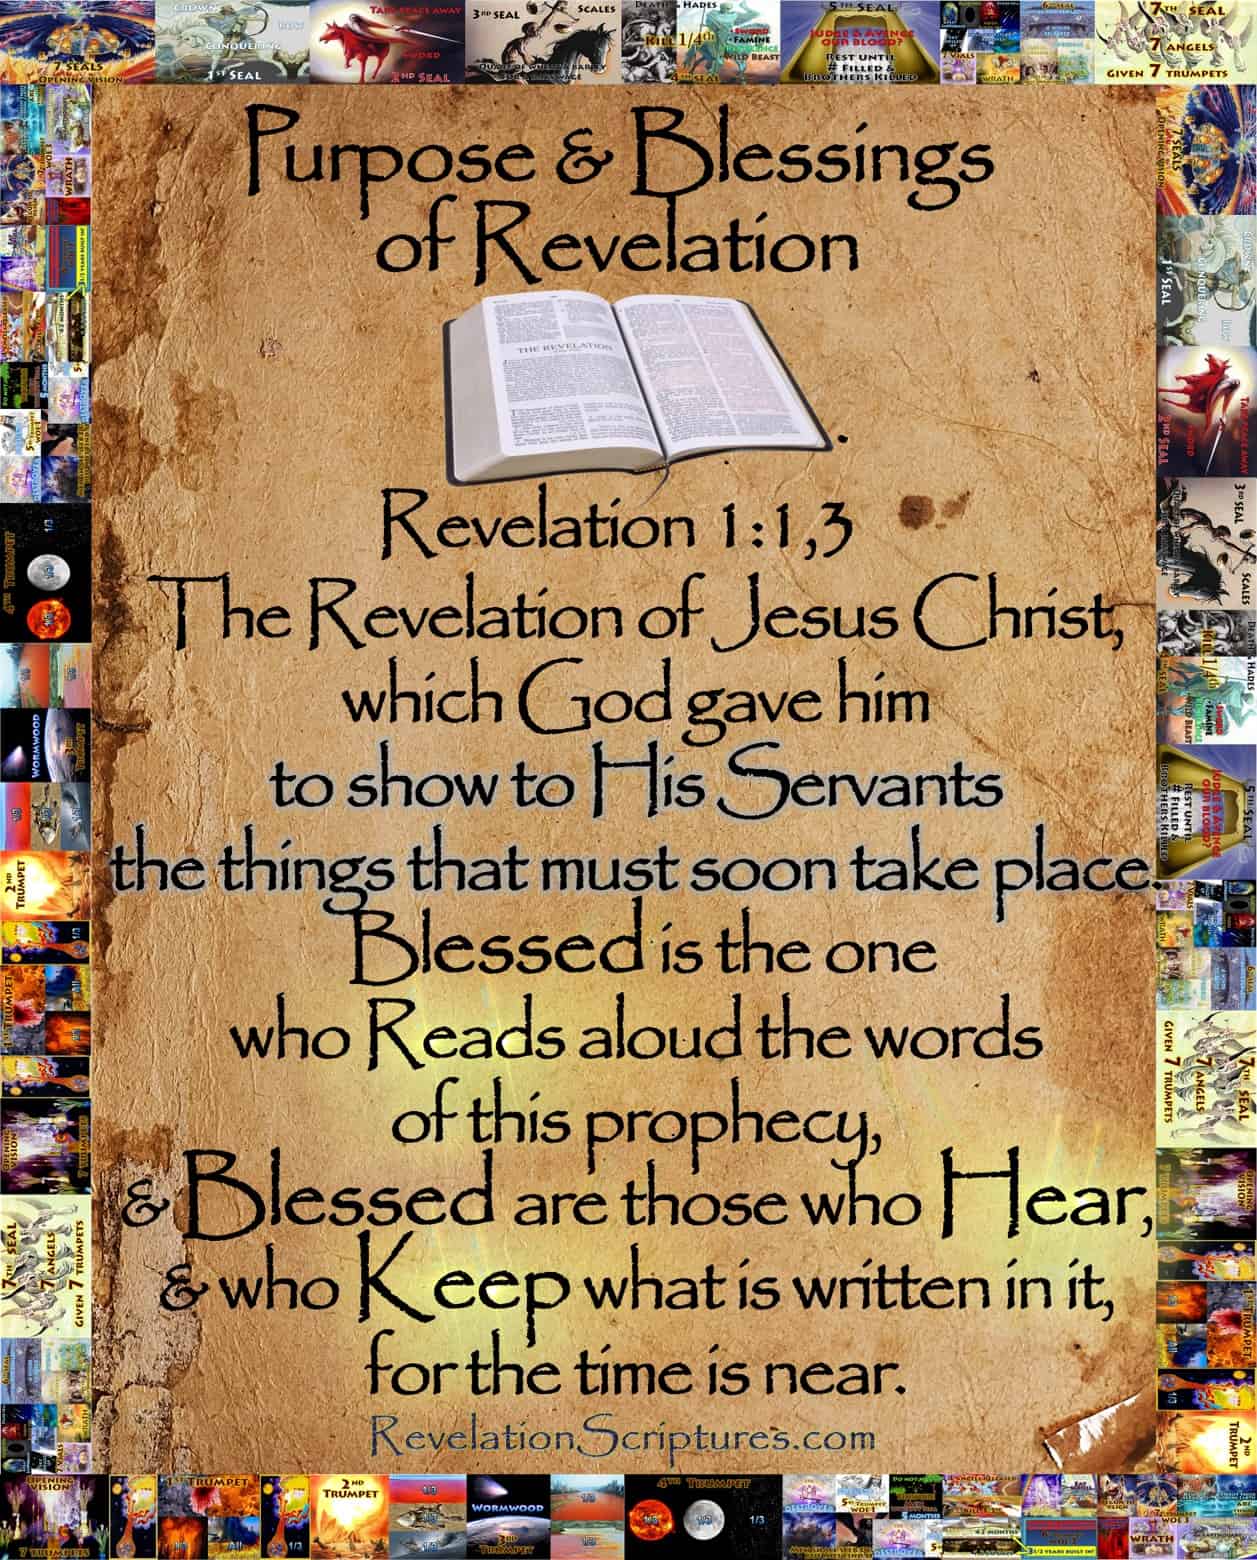 List of Biblical Principles & Scriptures to Understand Revelation & the Entire Bible